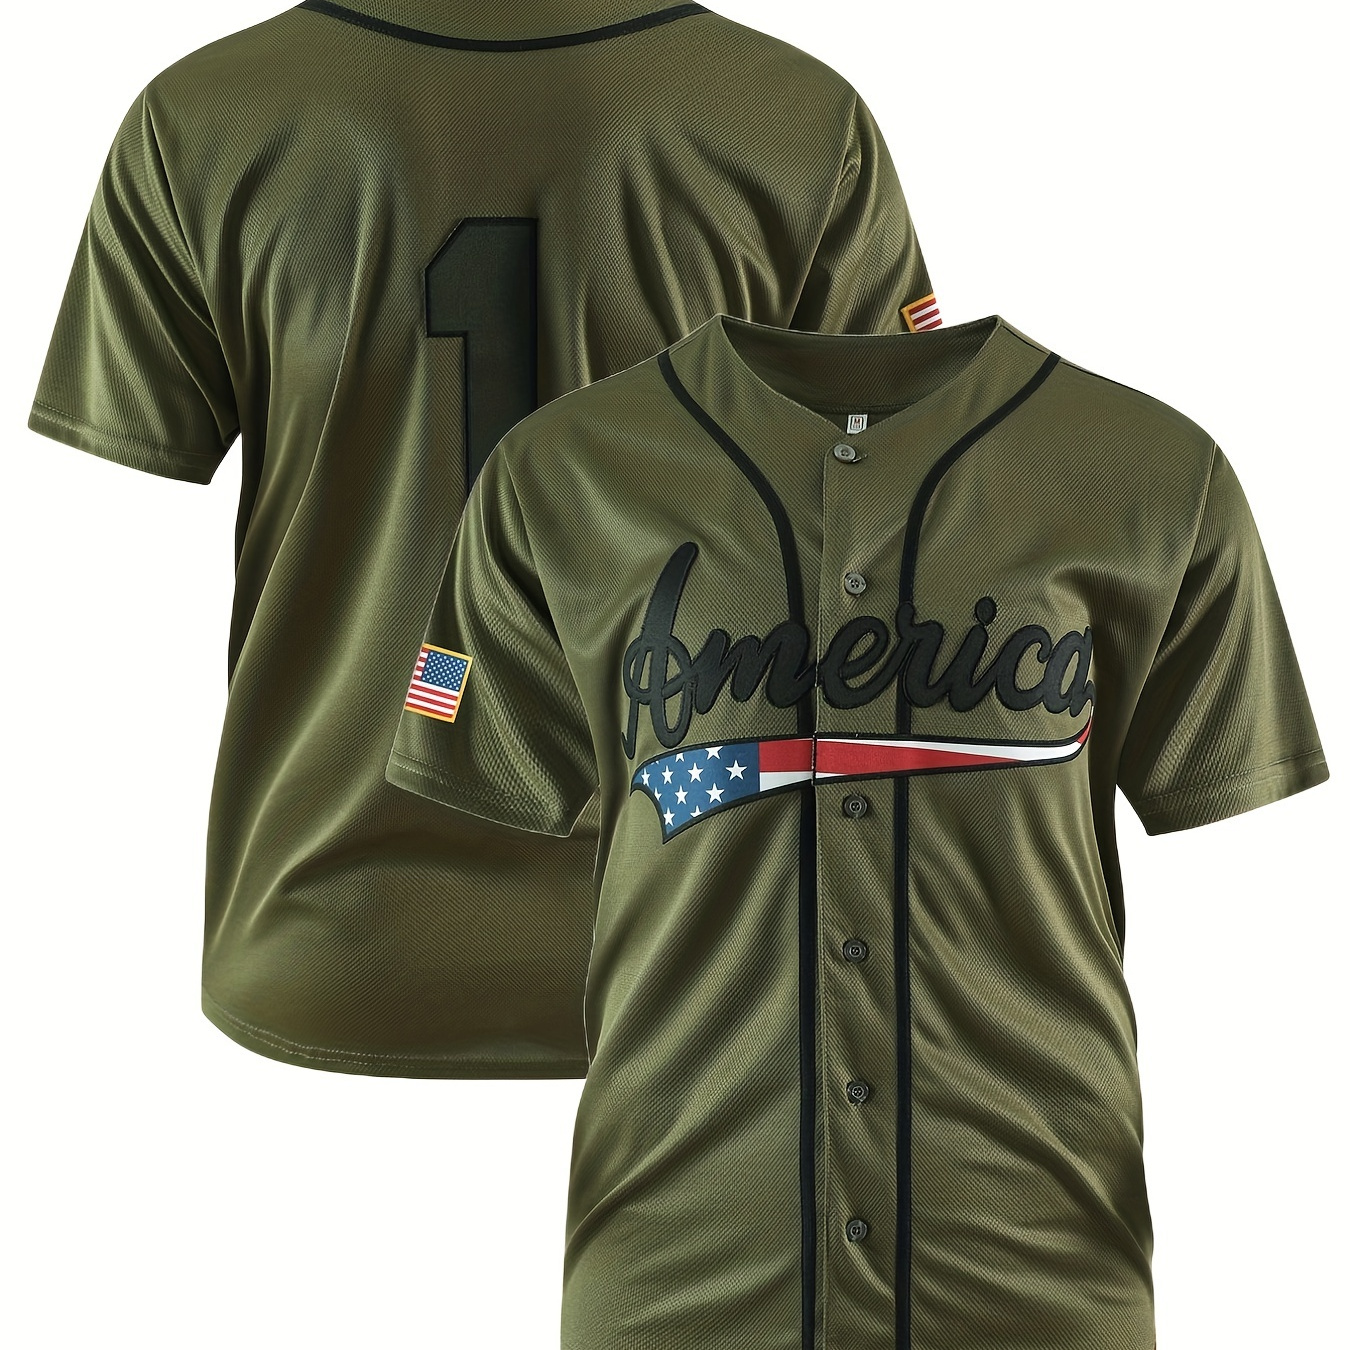 

Best Quality Trendy Casual 1 Baseball Jersey Army Green Short Sleeve Button Embroidery Athletic Shirt For Party Costume Gift